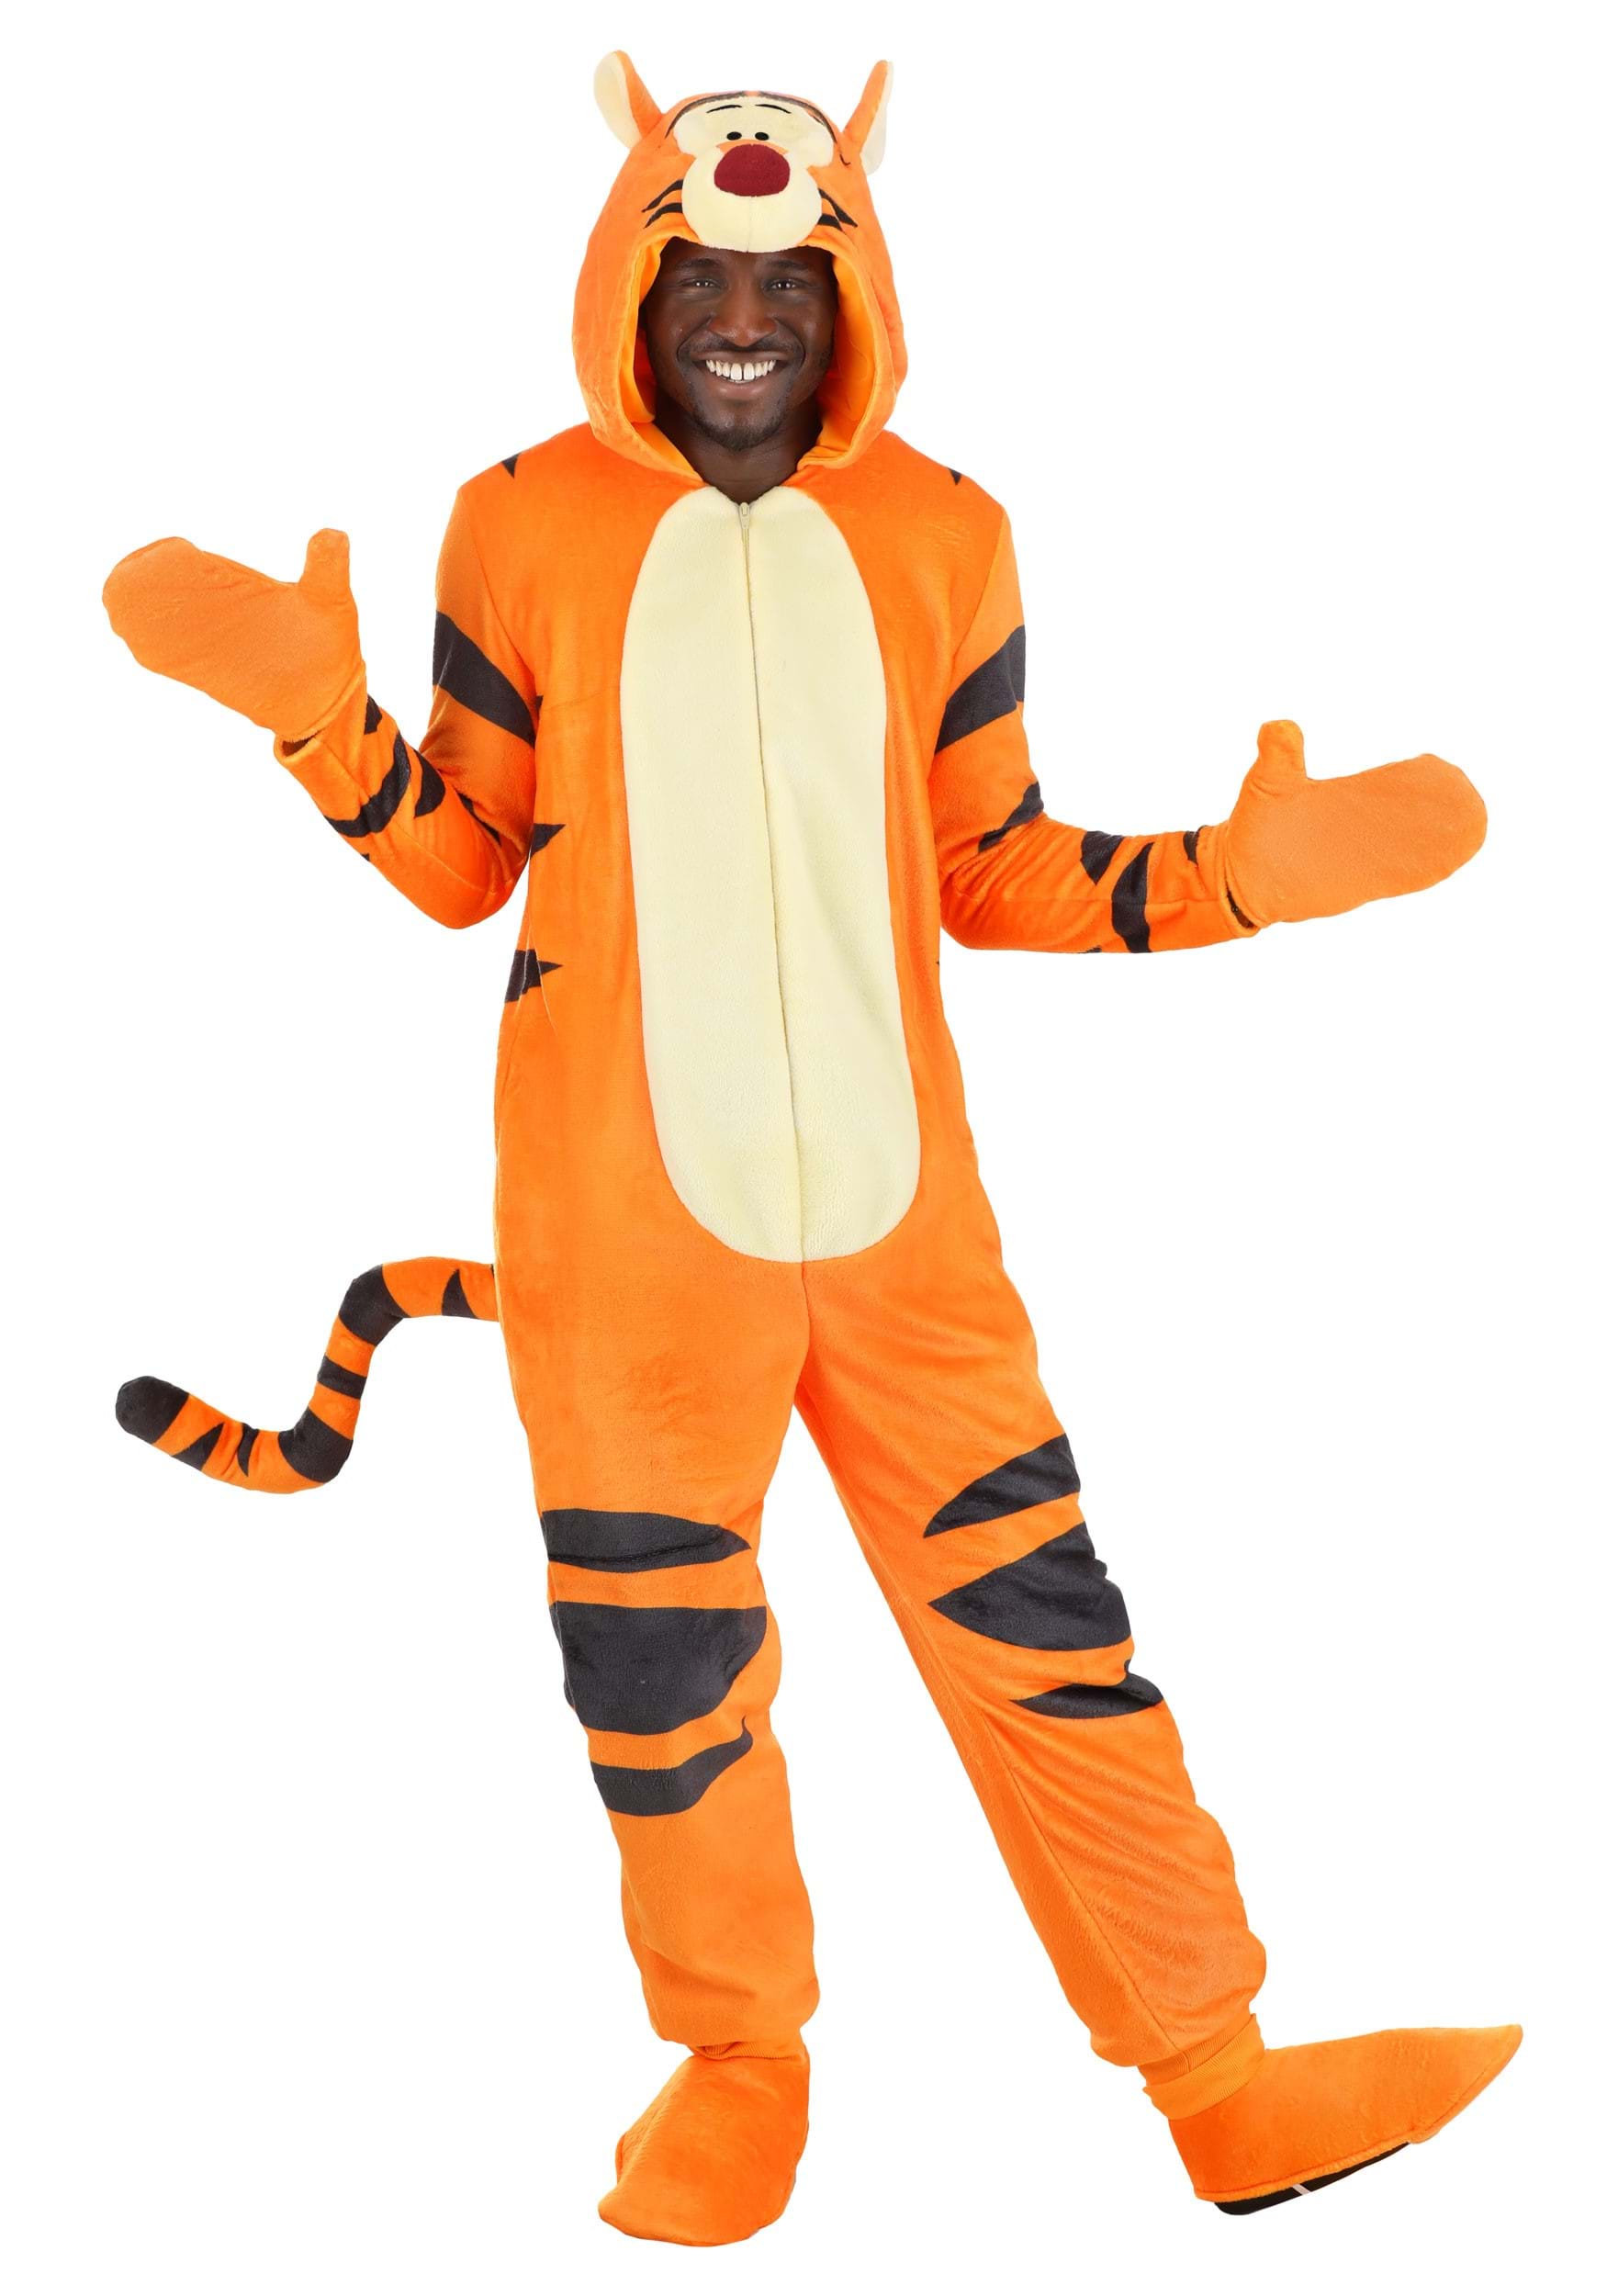 Image of Deluxe Disney Tigger Costume for Adults ID FUN4716AD-XS